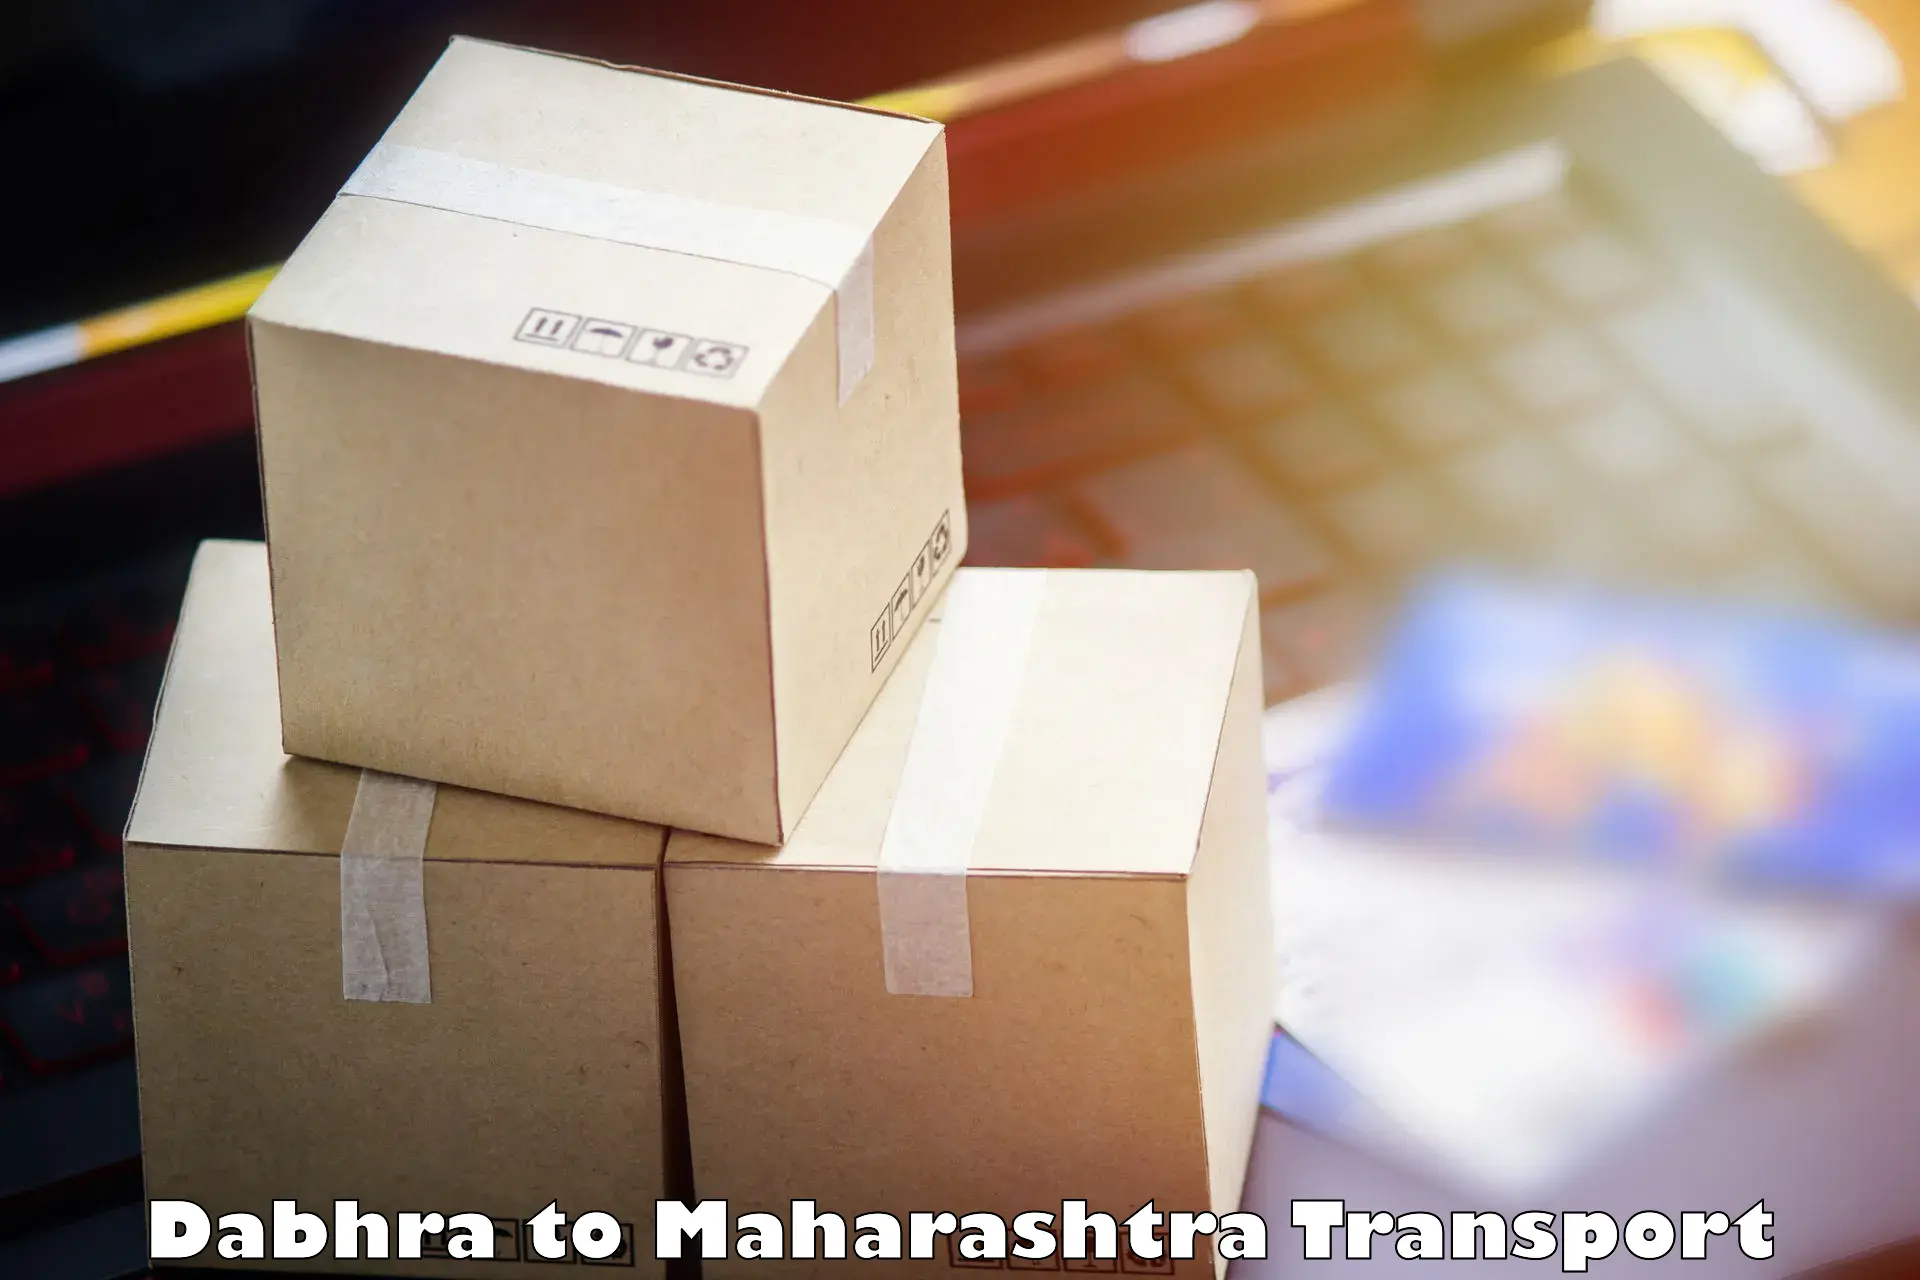 Truck transport companies in India Dabhra to Shindkheda